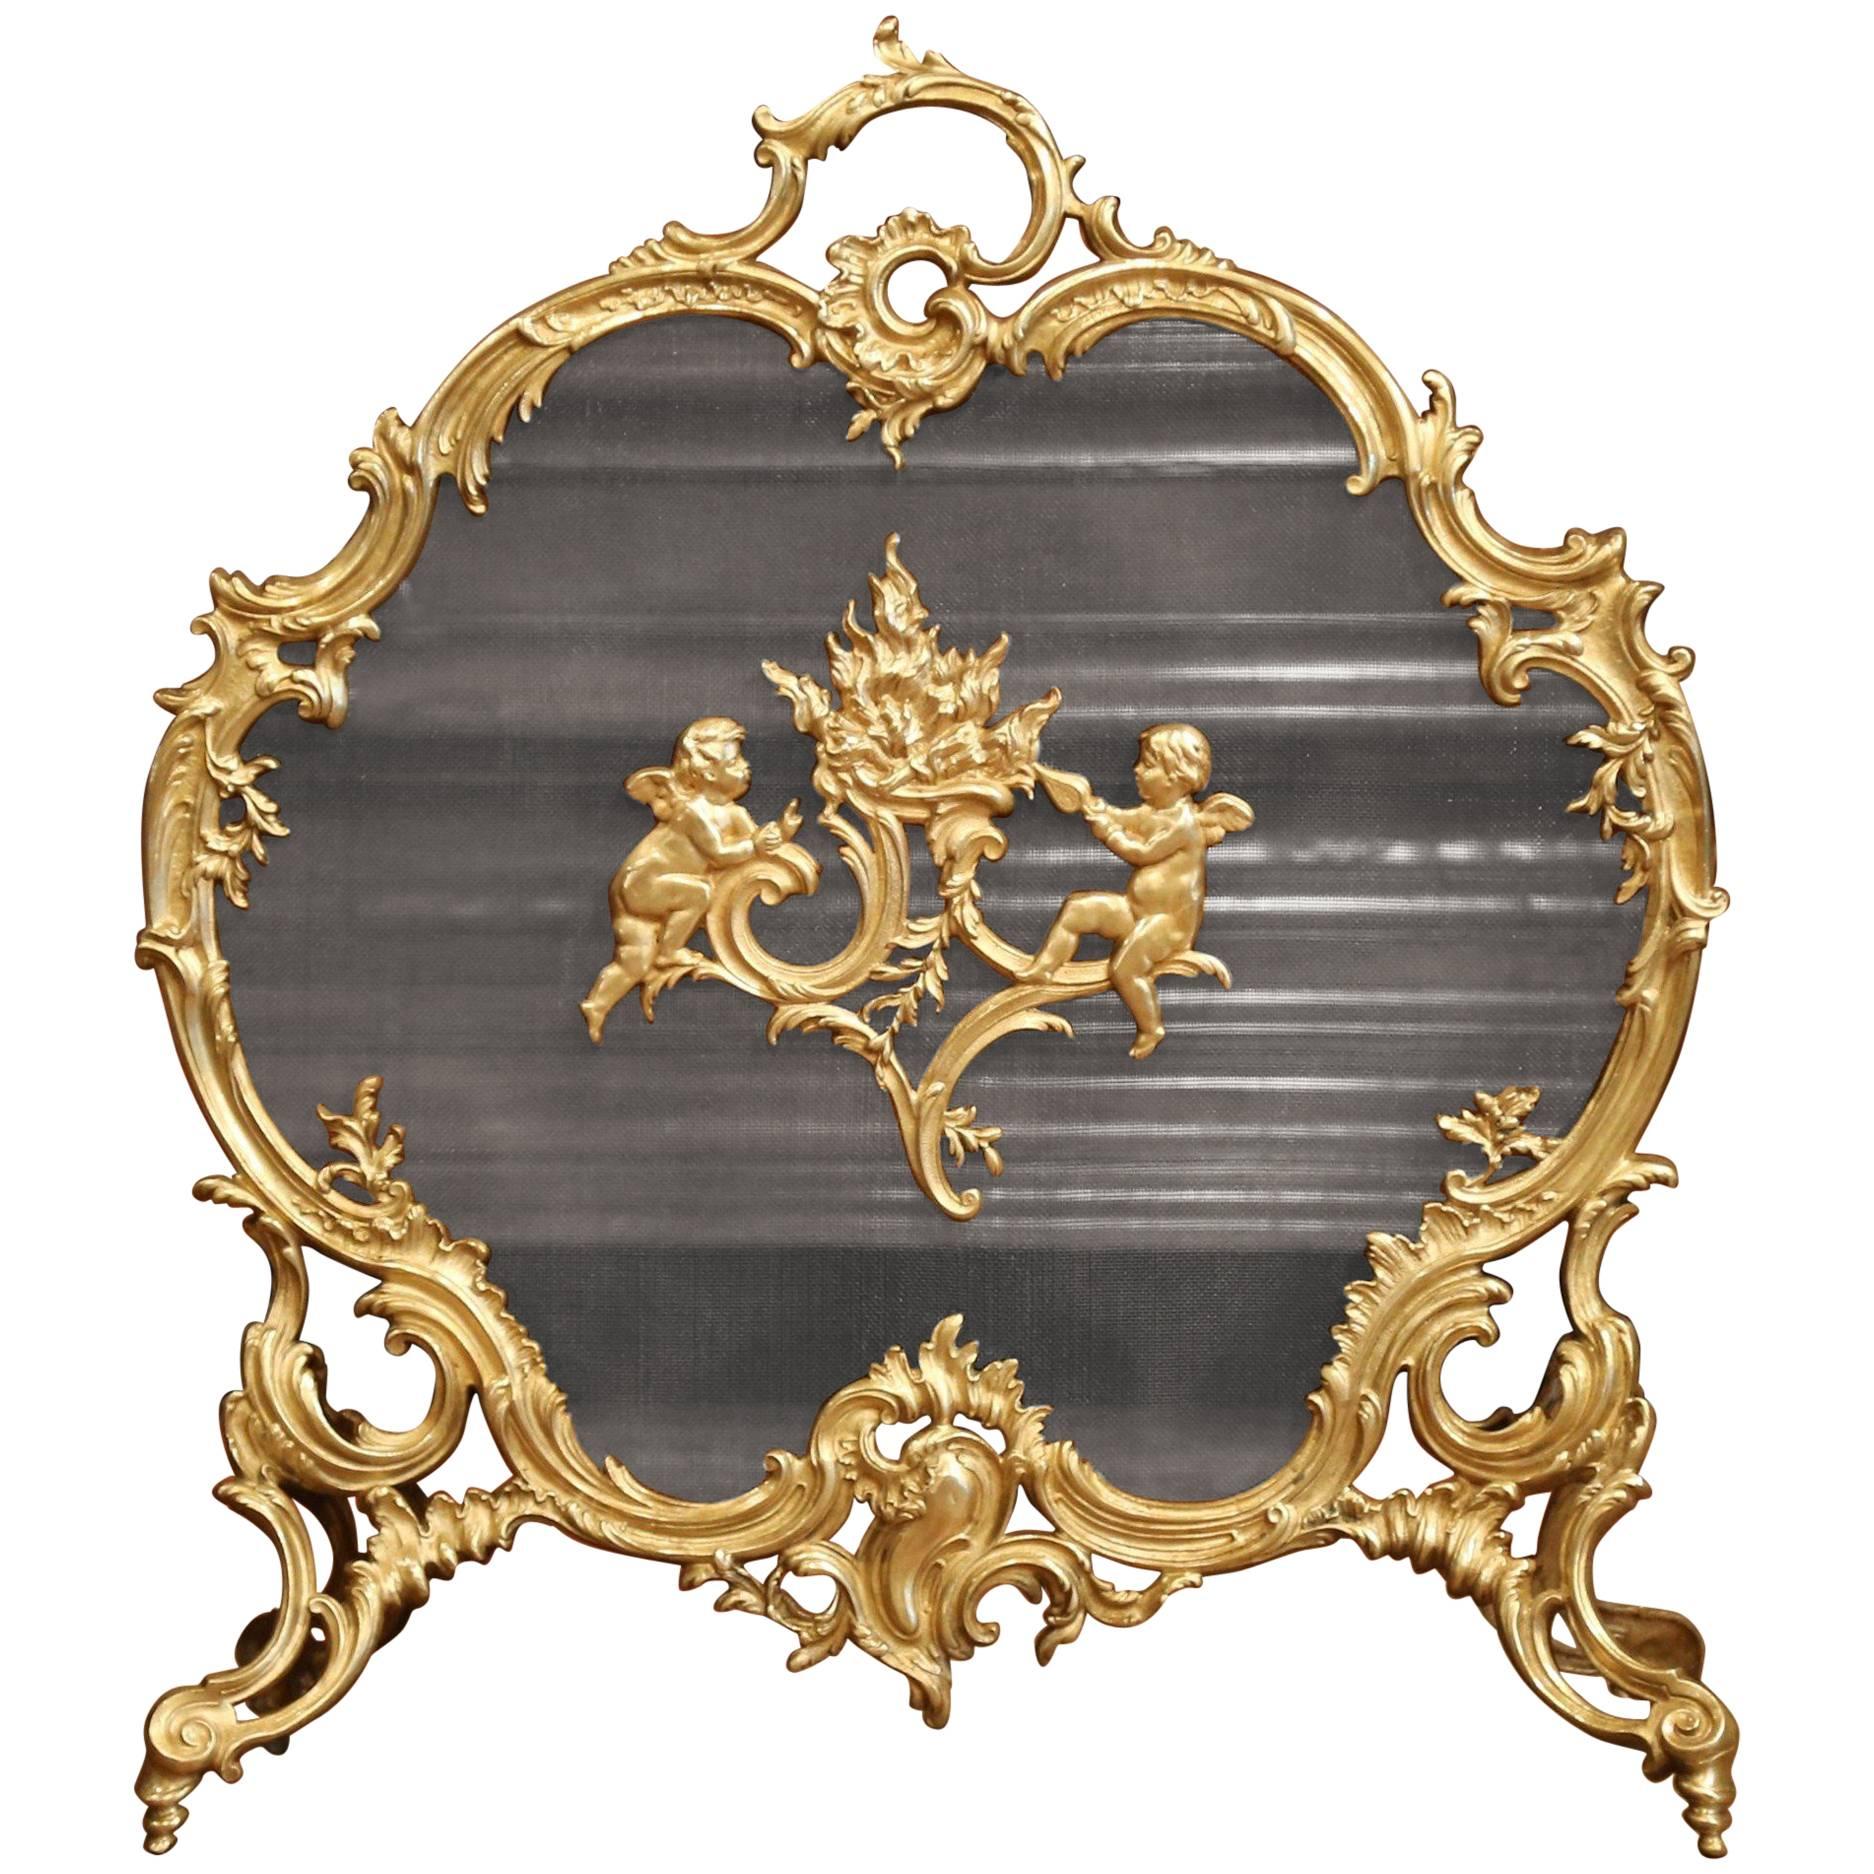 19th Century French Louis XV Carved Gilt Bronze Fireplace Screen with Cherubs